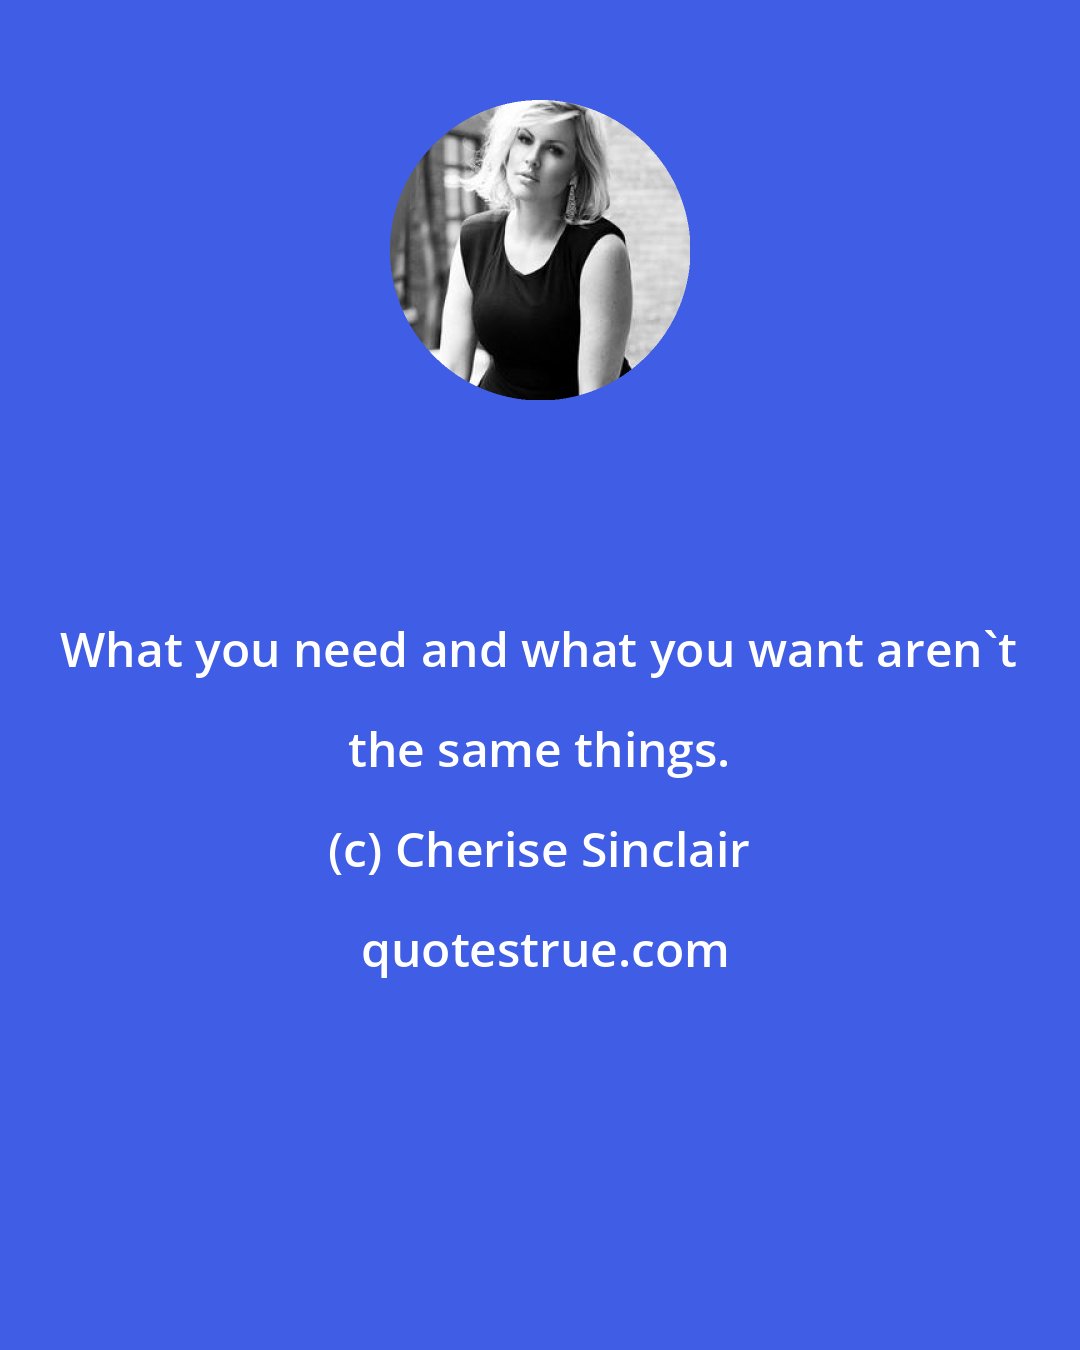 Cherise Sinclair: What you need and what you want aren't the same things.